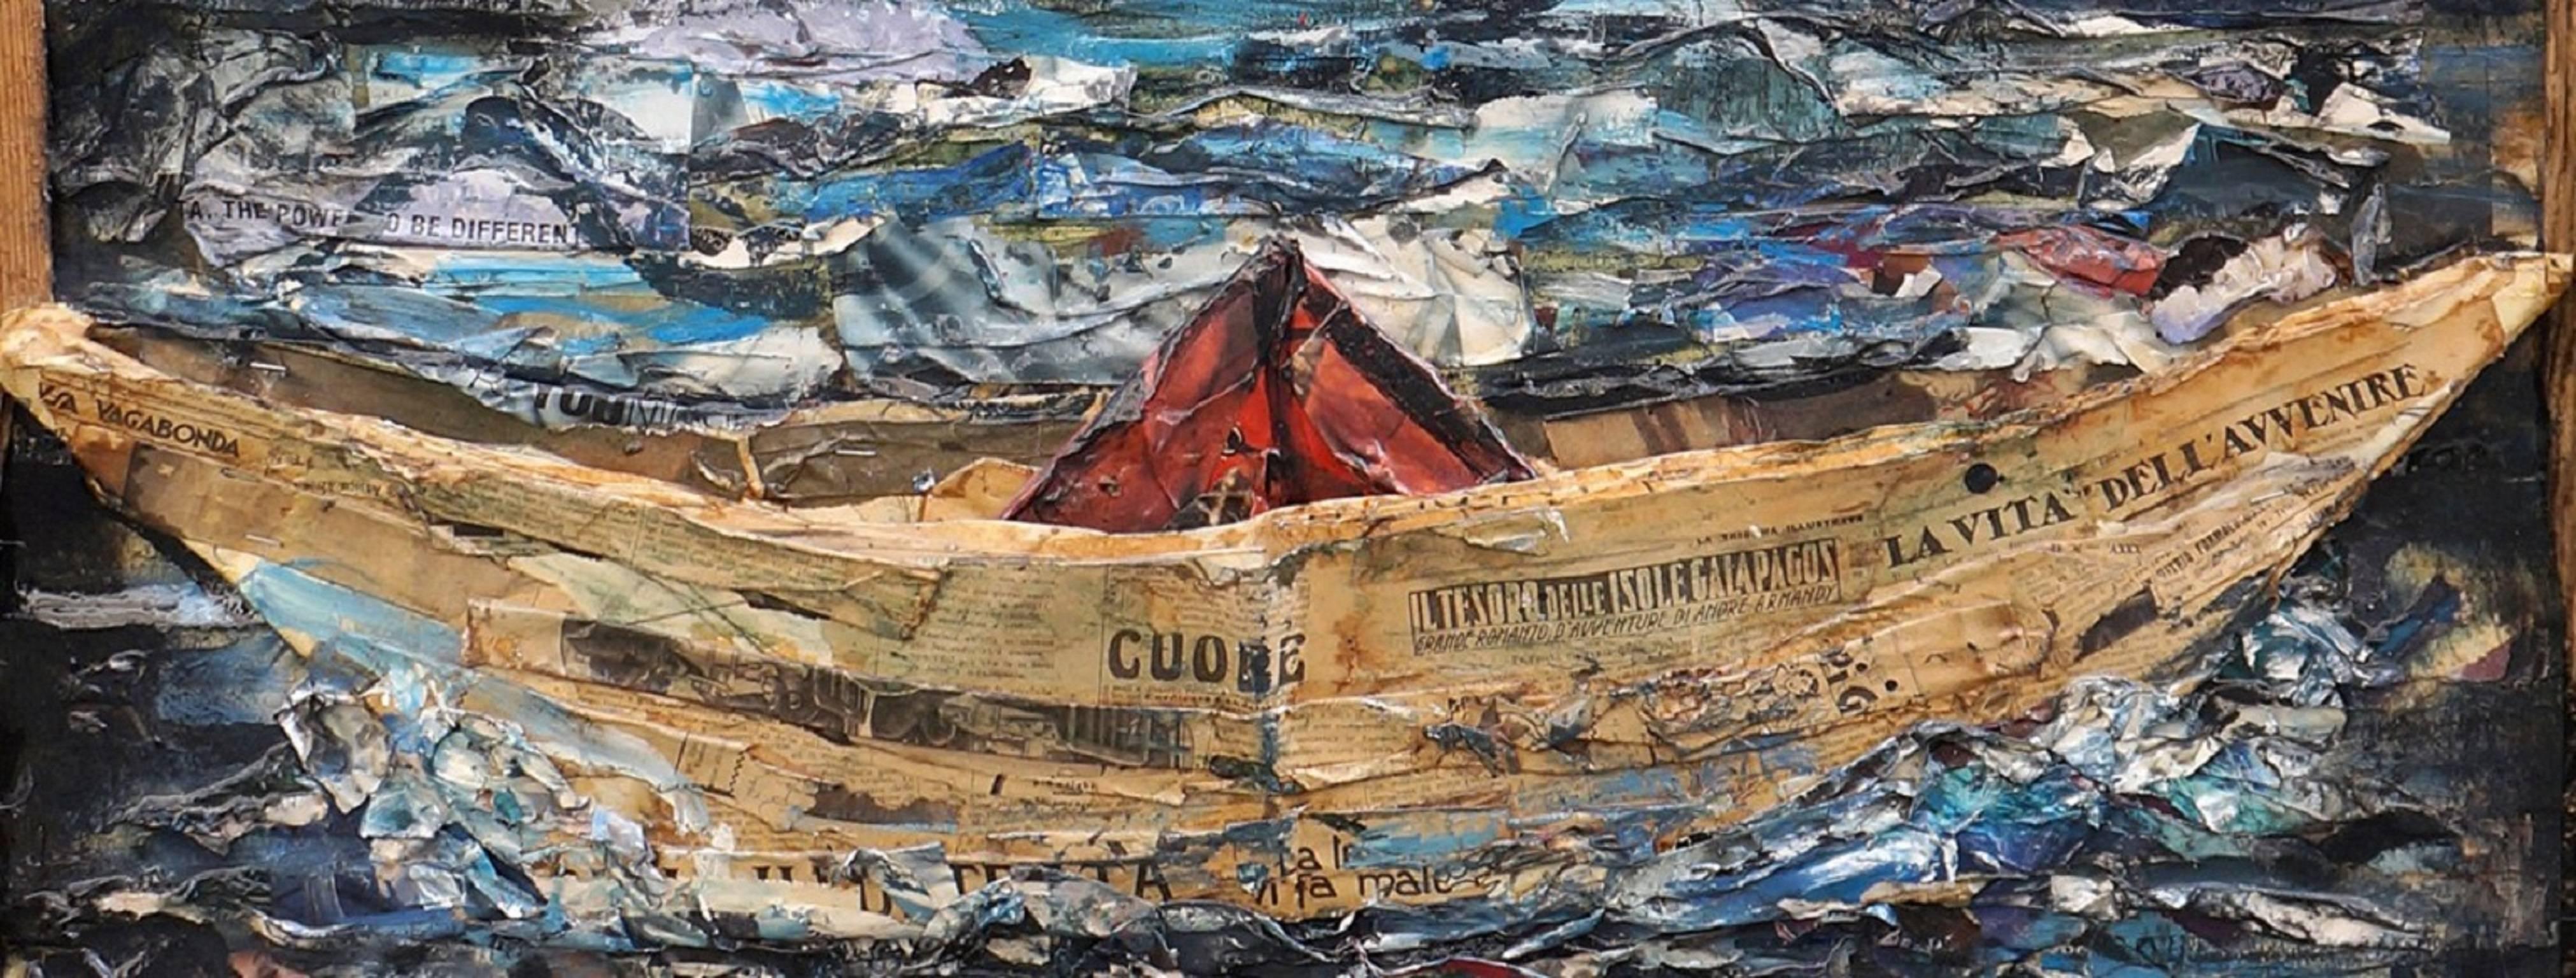 Paper Boats. Contemporary figurative/landscape painting, collage with wood, 2015 - Painting by Paolo Franzoso